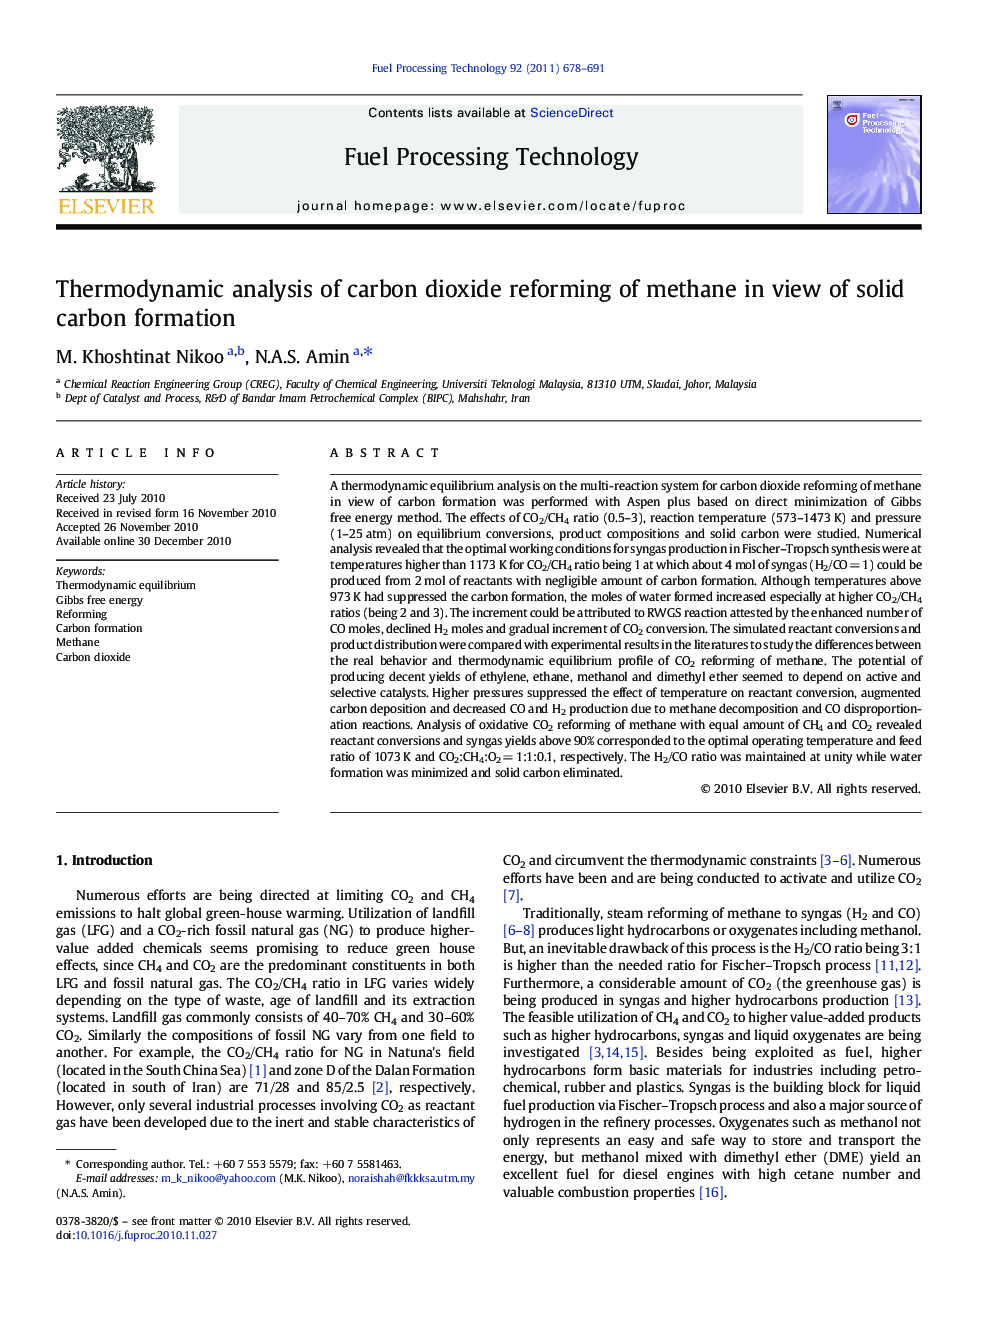 Thermodynamic analysis of carbon dioxide reforming of methane in view of solid carbon formation